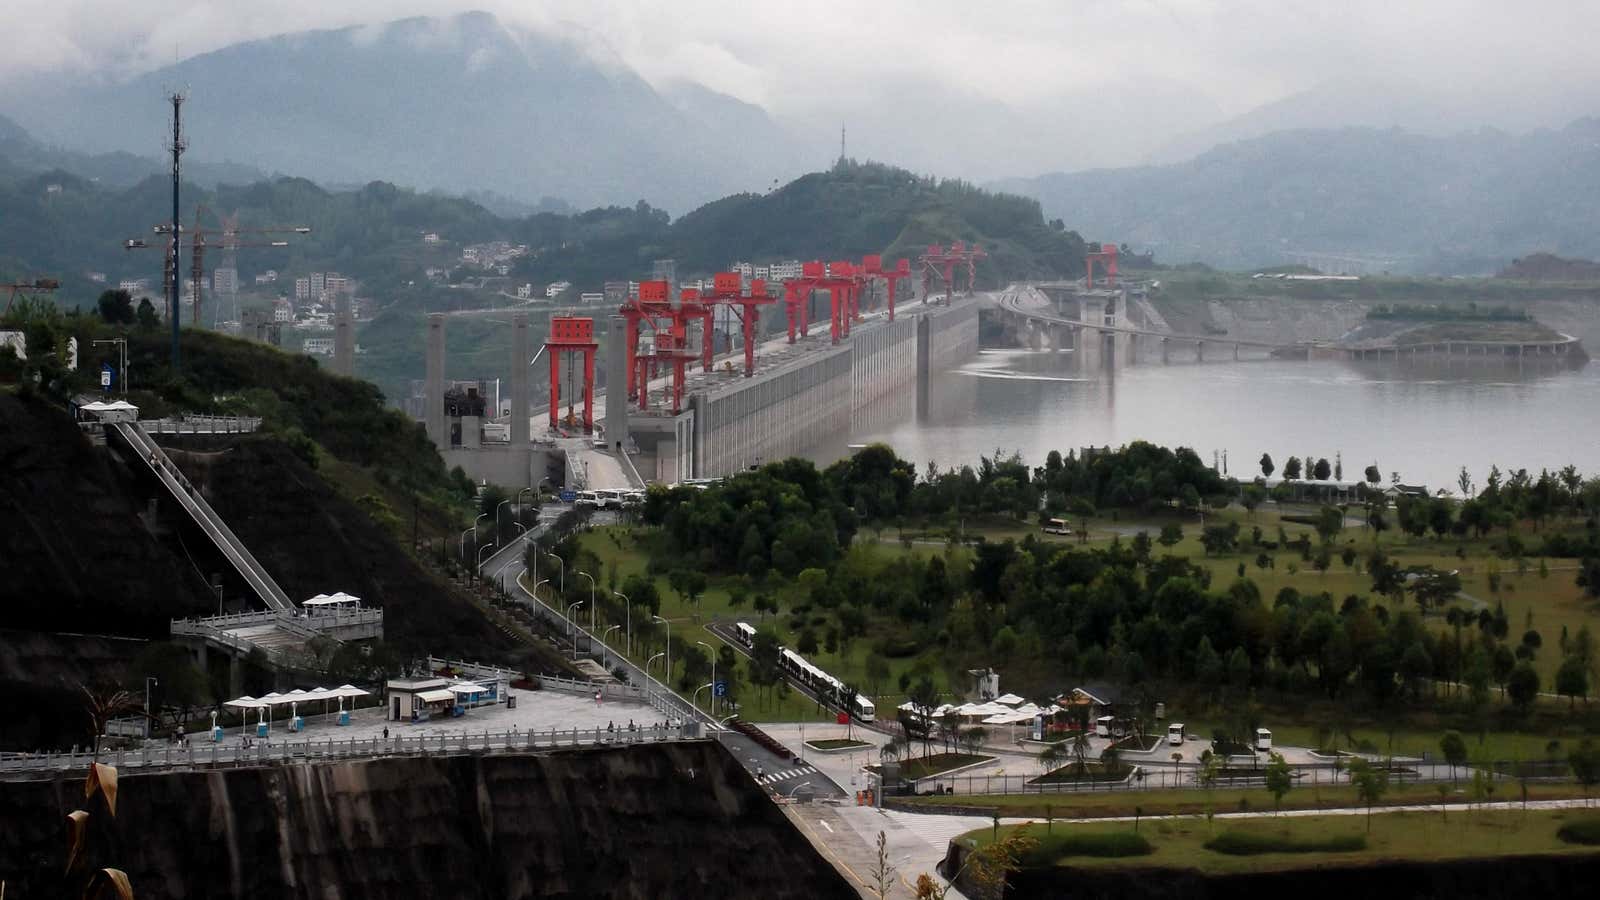 Completed this year, Three Gorges Dam in Hubei, China is the world’s largest hydroelectric power station.